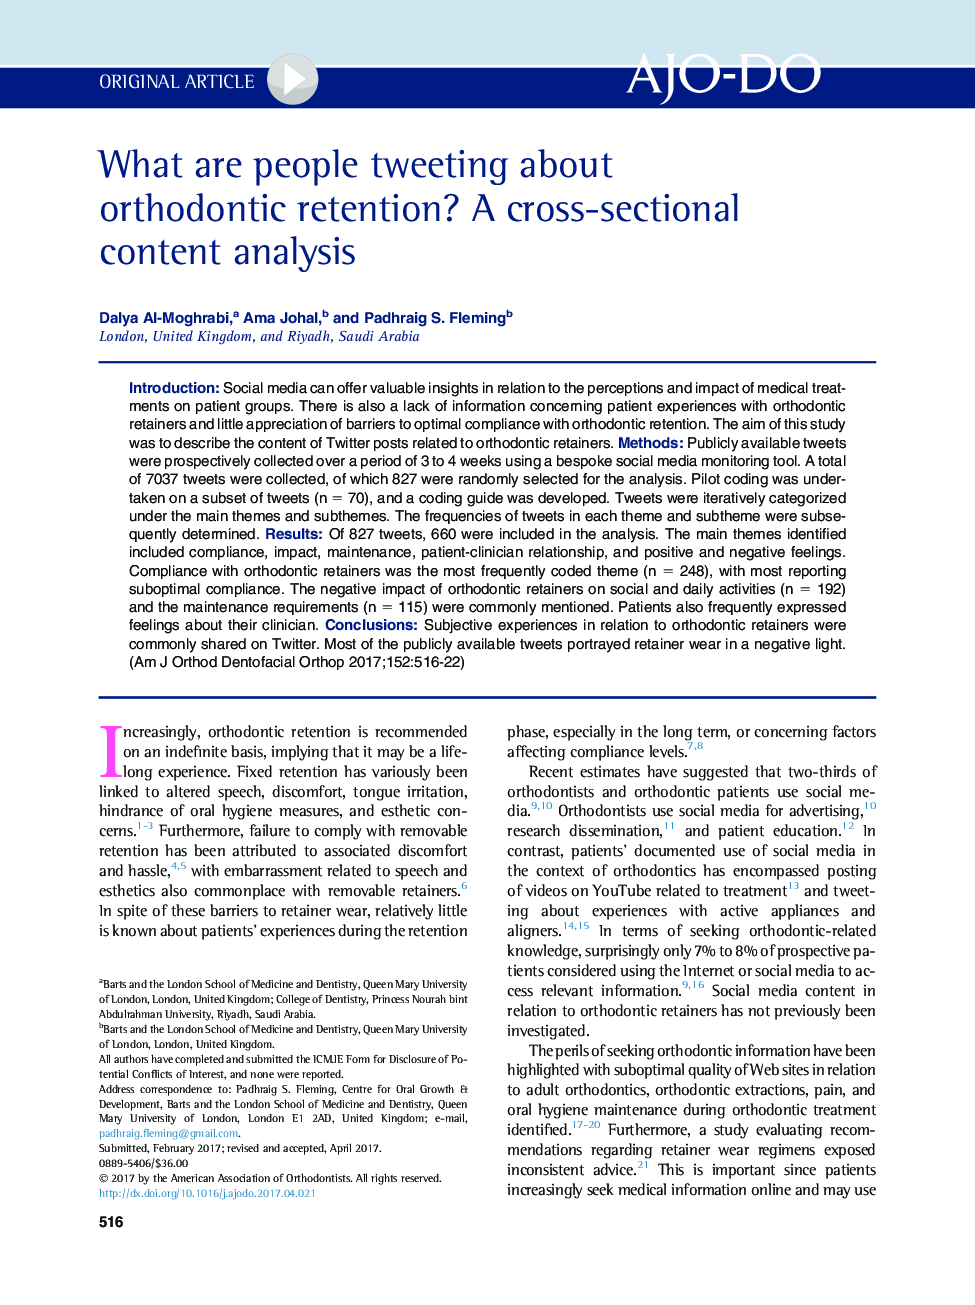 What are people tweeting about orthodontic retention? A cross-sectional content analysis